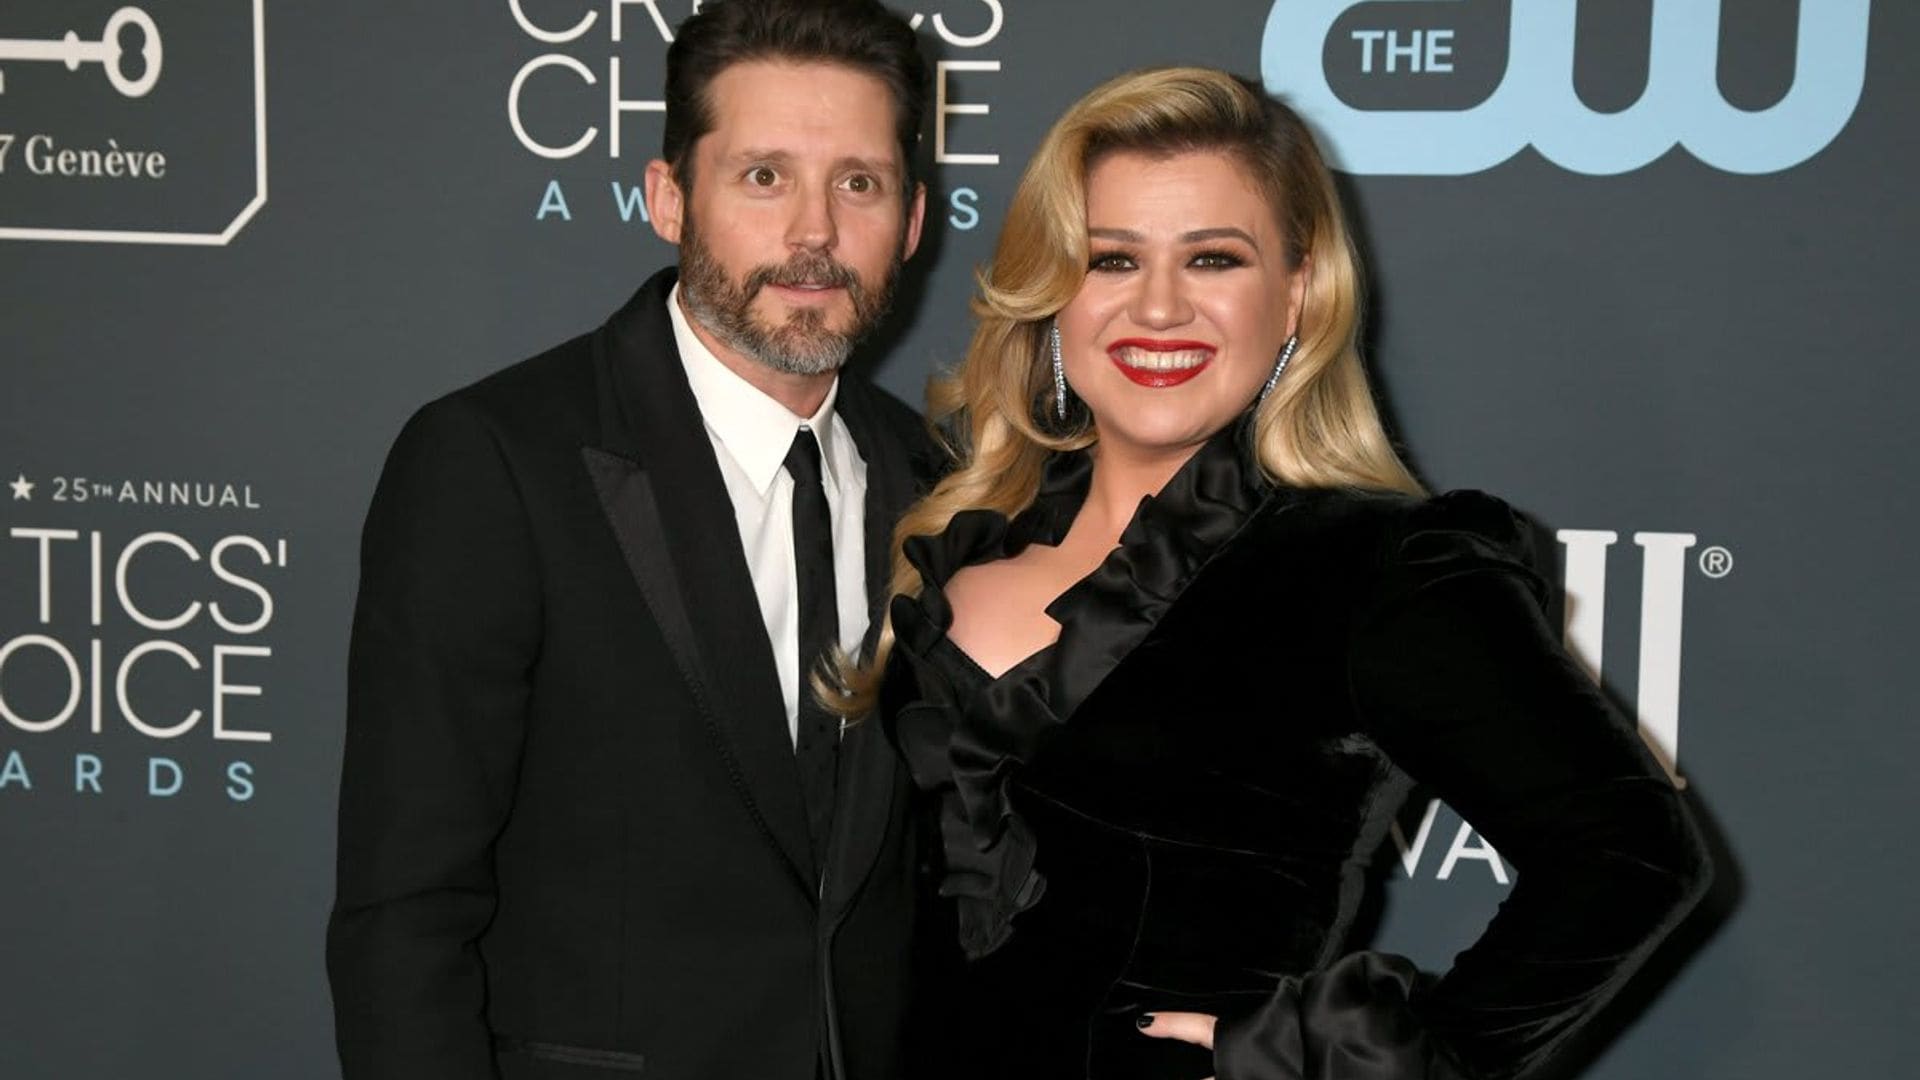 Kelly Clarkson wins battle against her ex-husband over Montana ranch